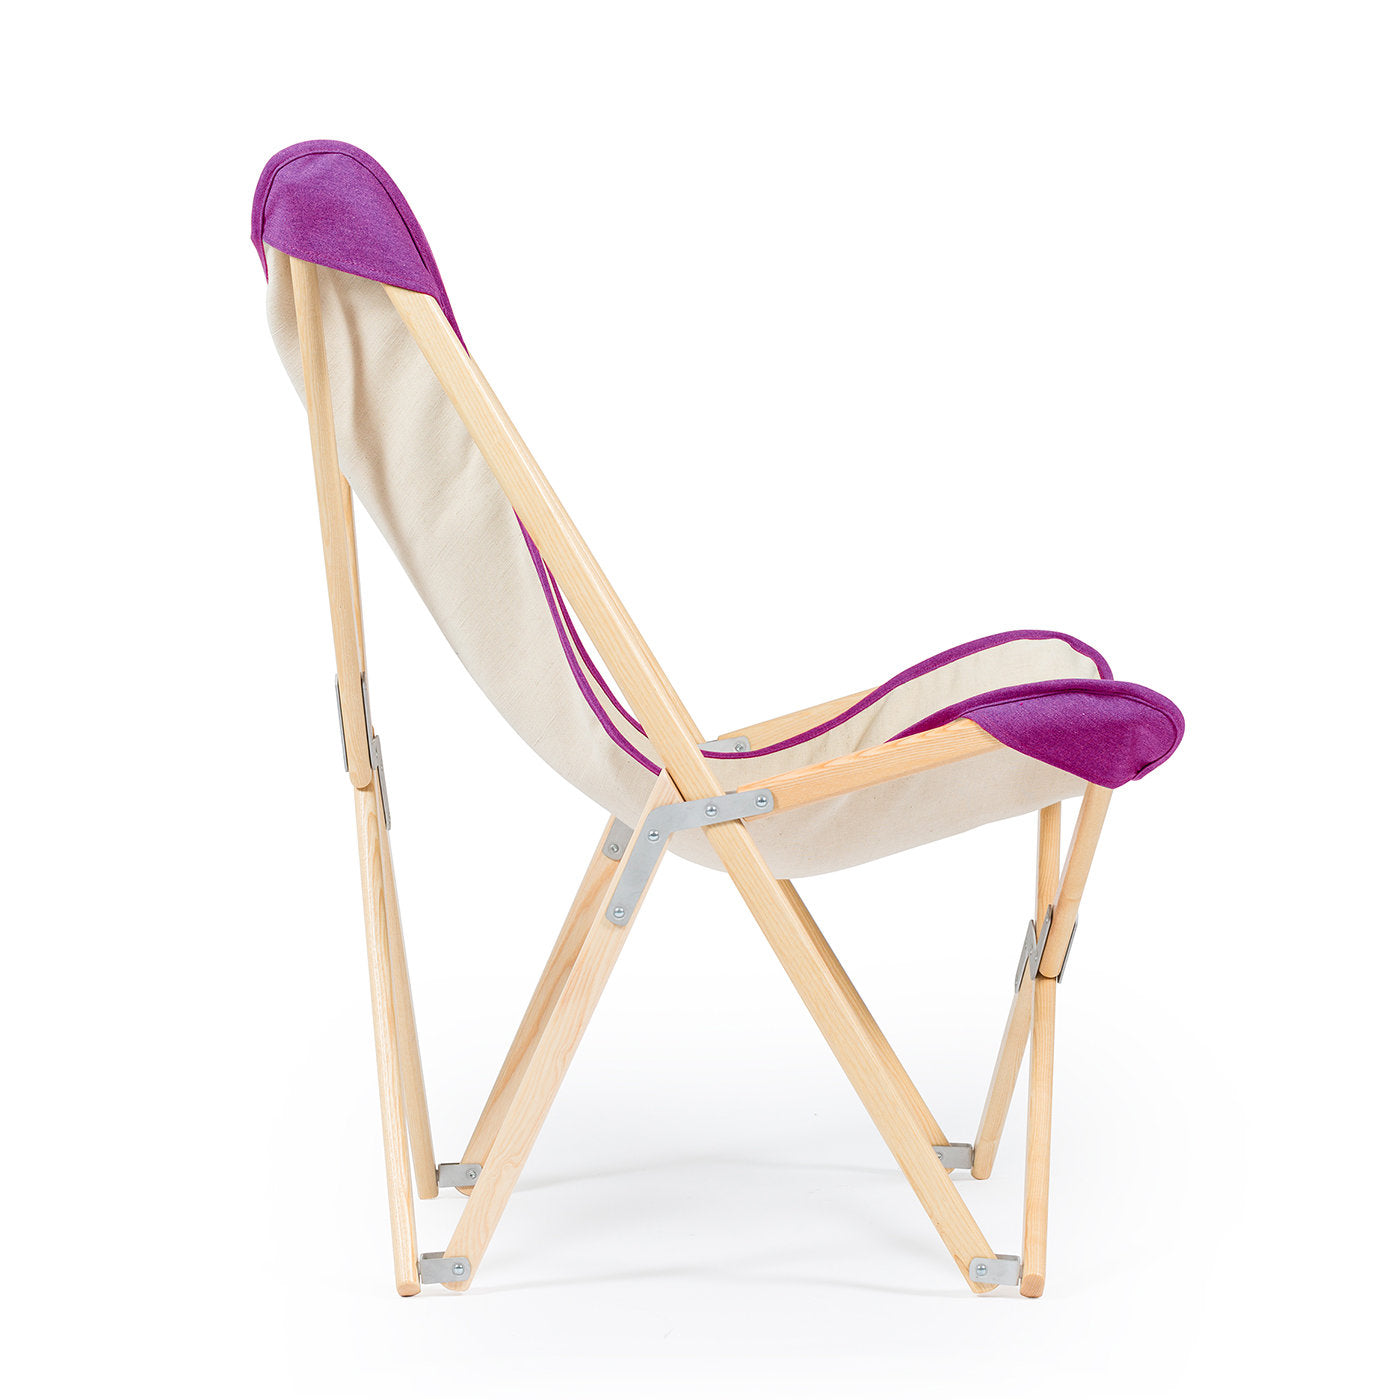 Tripolina Armchair in Cream and Purple - Alternative view 1